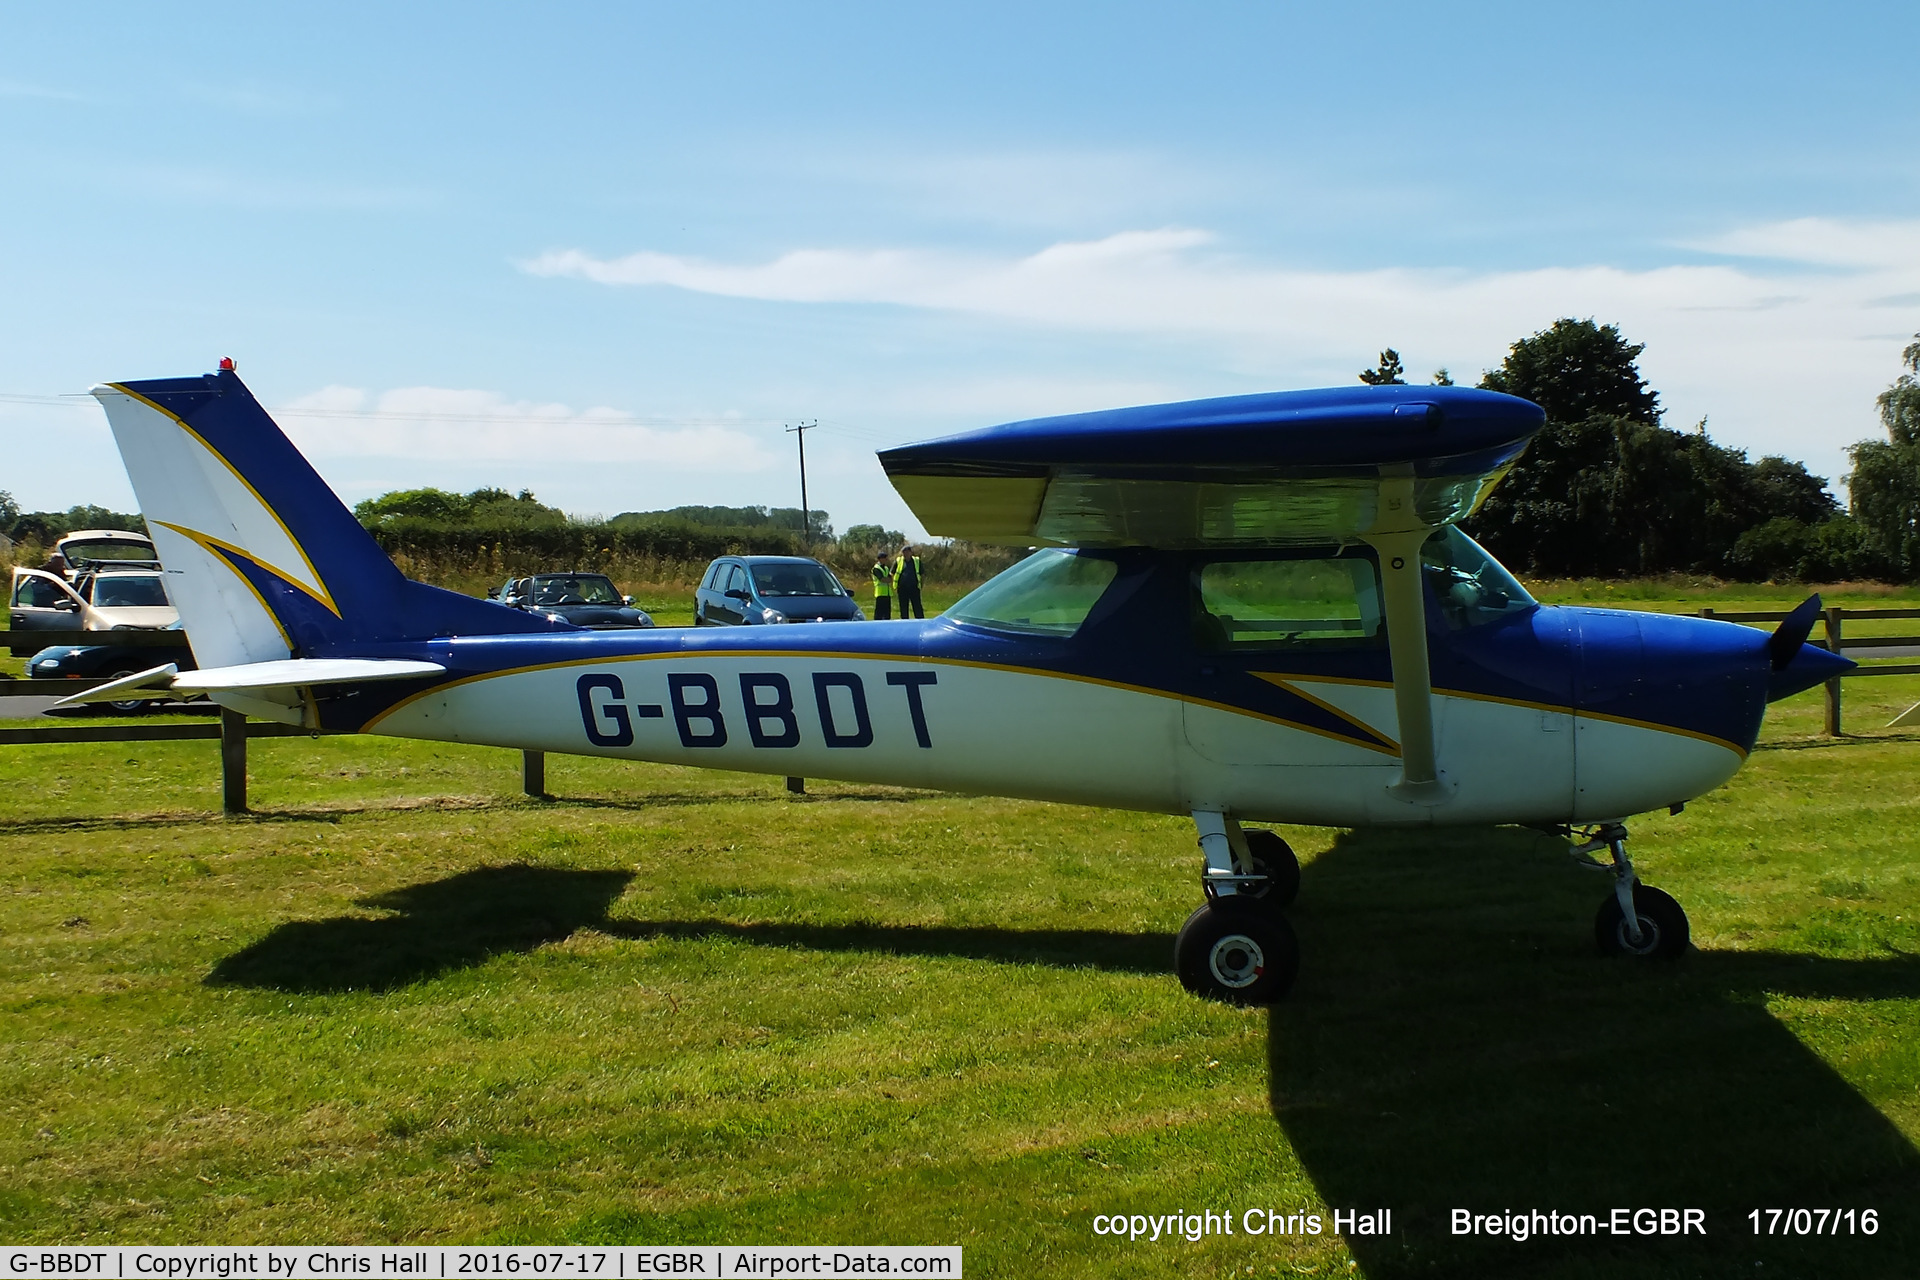 G-BBDT, 1968 Cessna 150H C/N 150-68839, at Breighton's Summer Fly-in